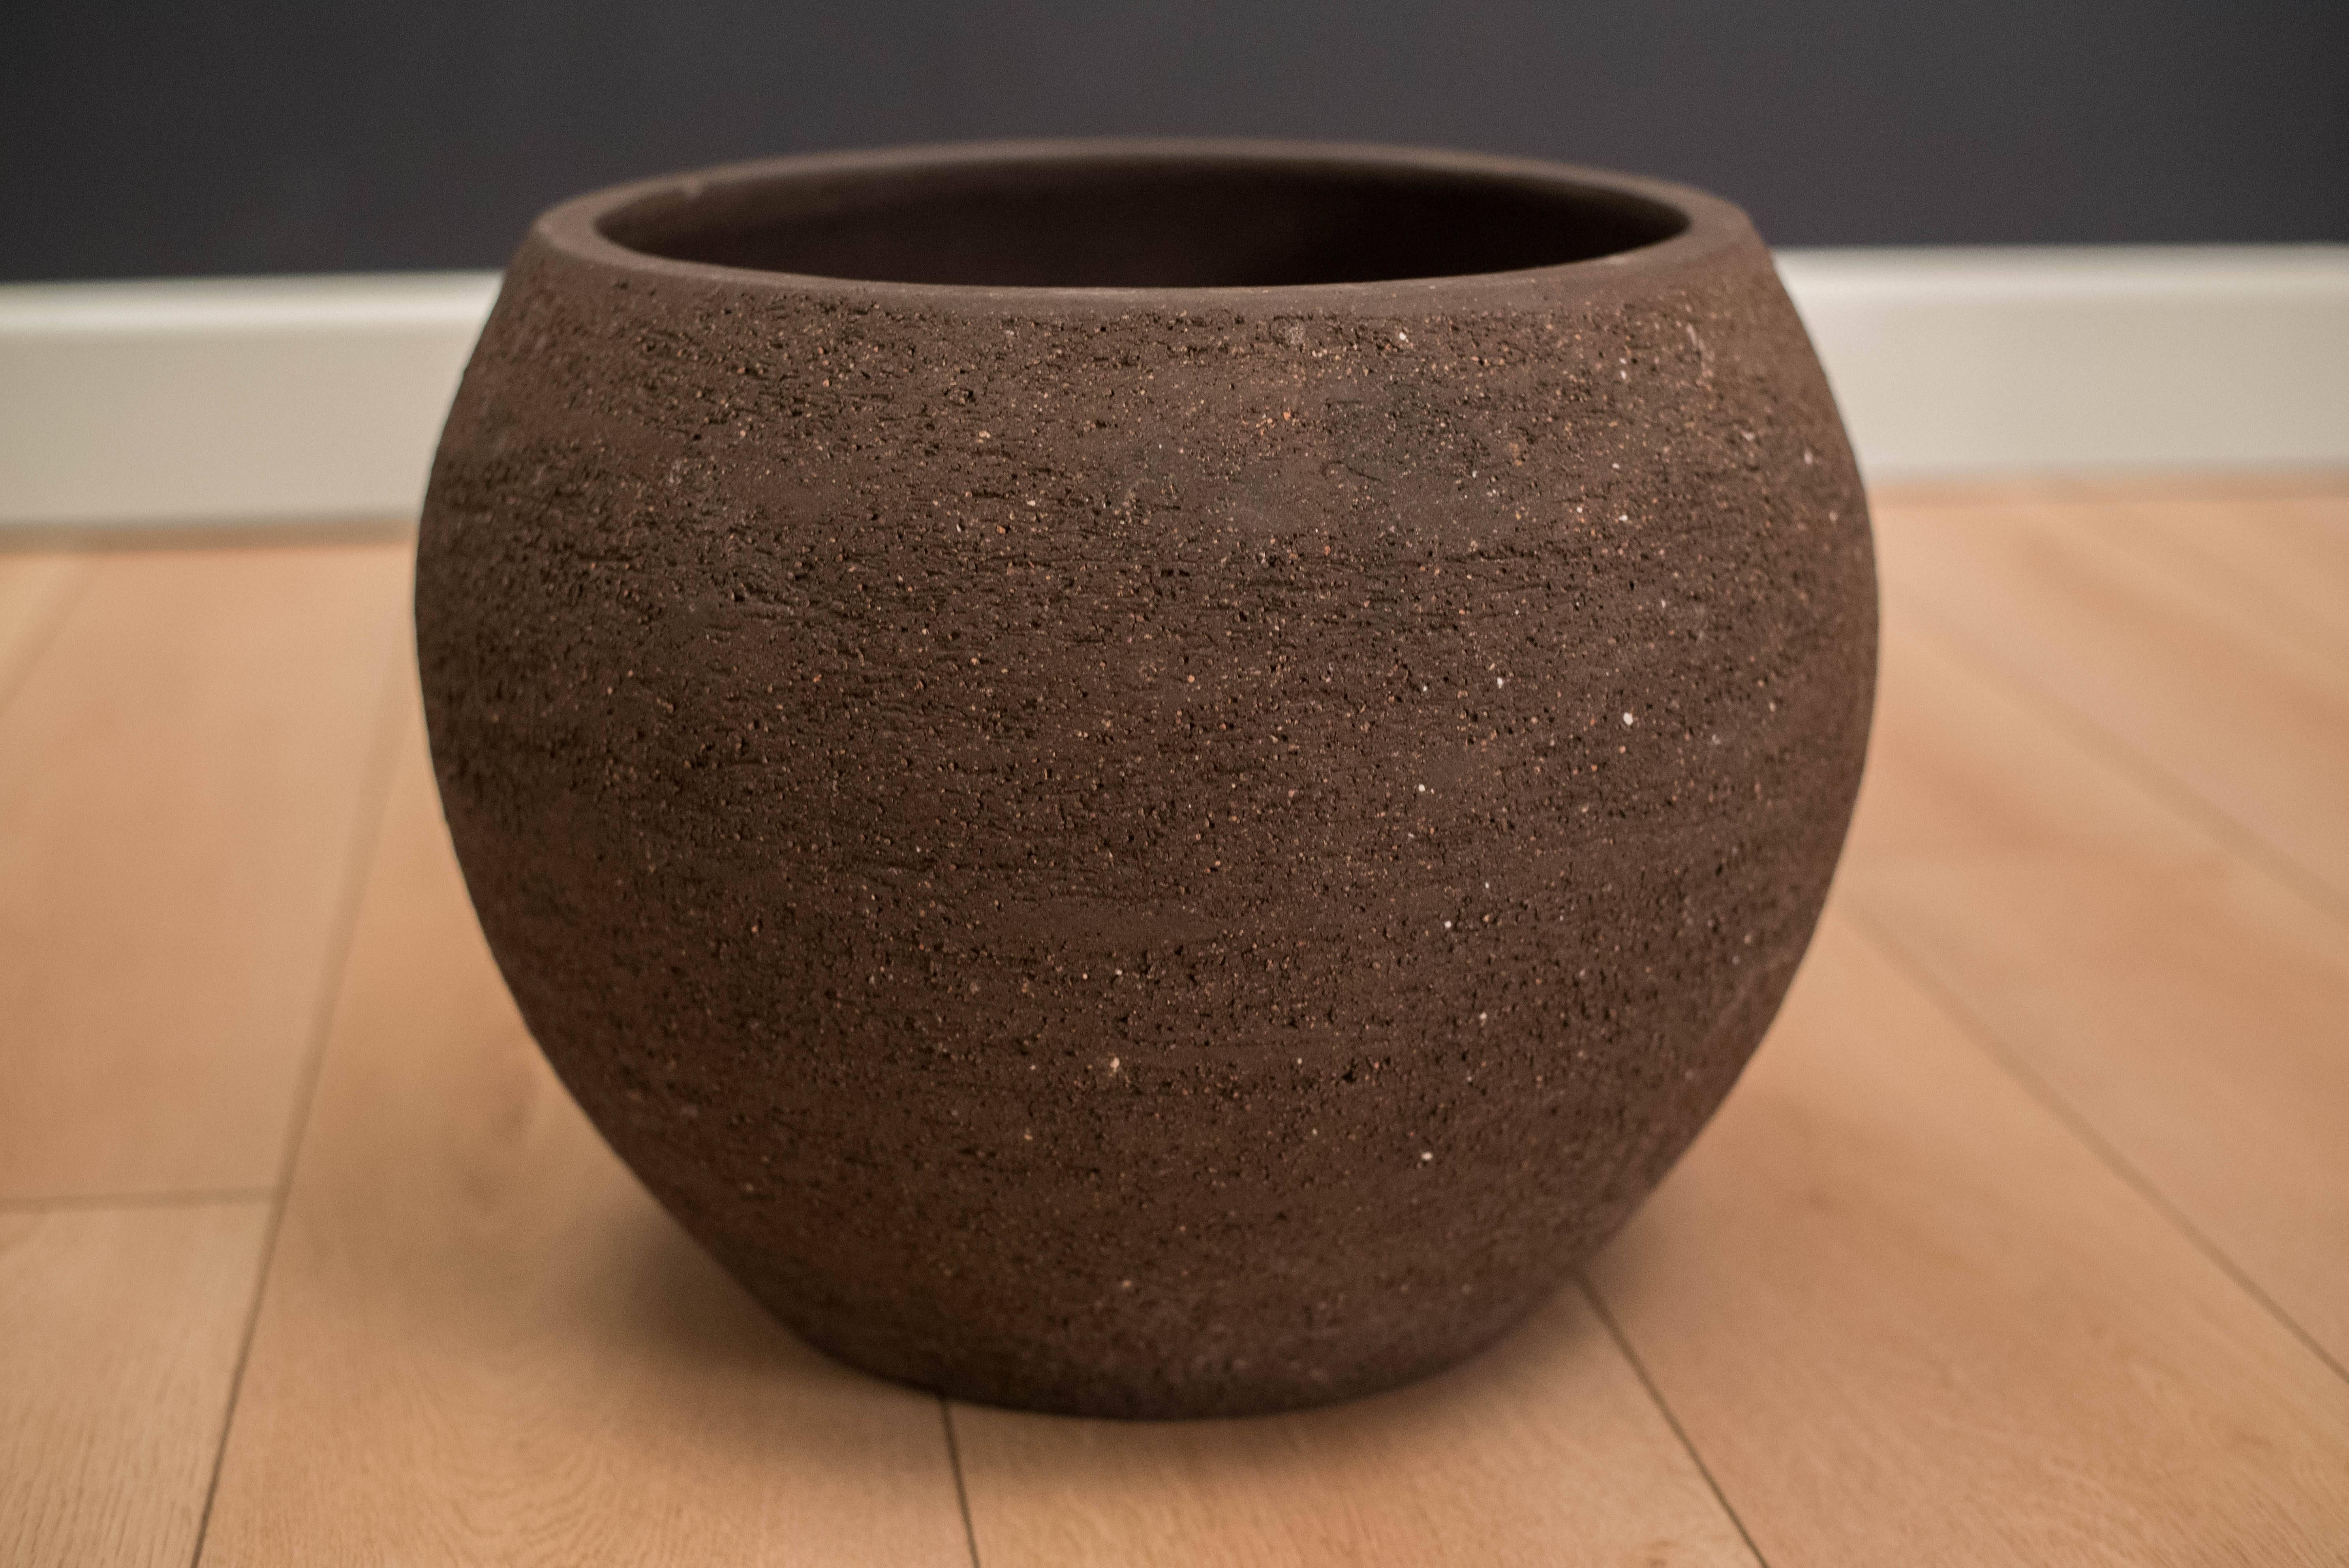 Vintage scrape pottery planter designed by California sculptor Stan Bitters for Hans Sumpf, circa 1970s.

